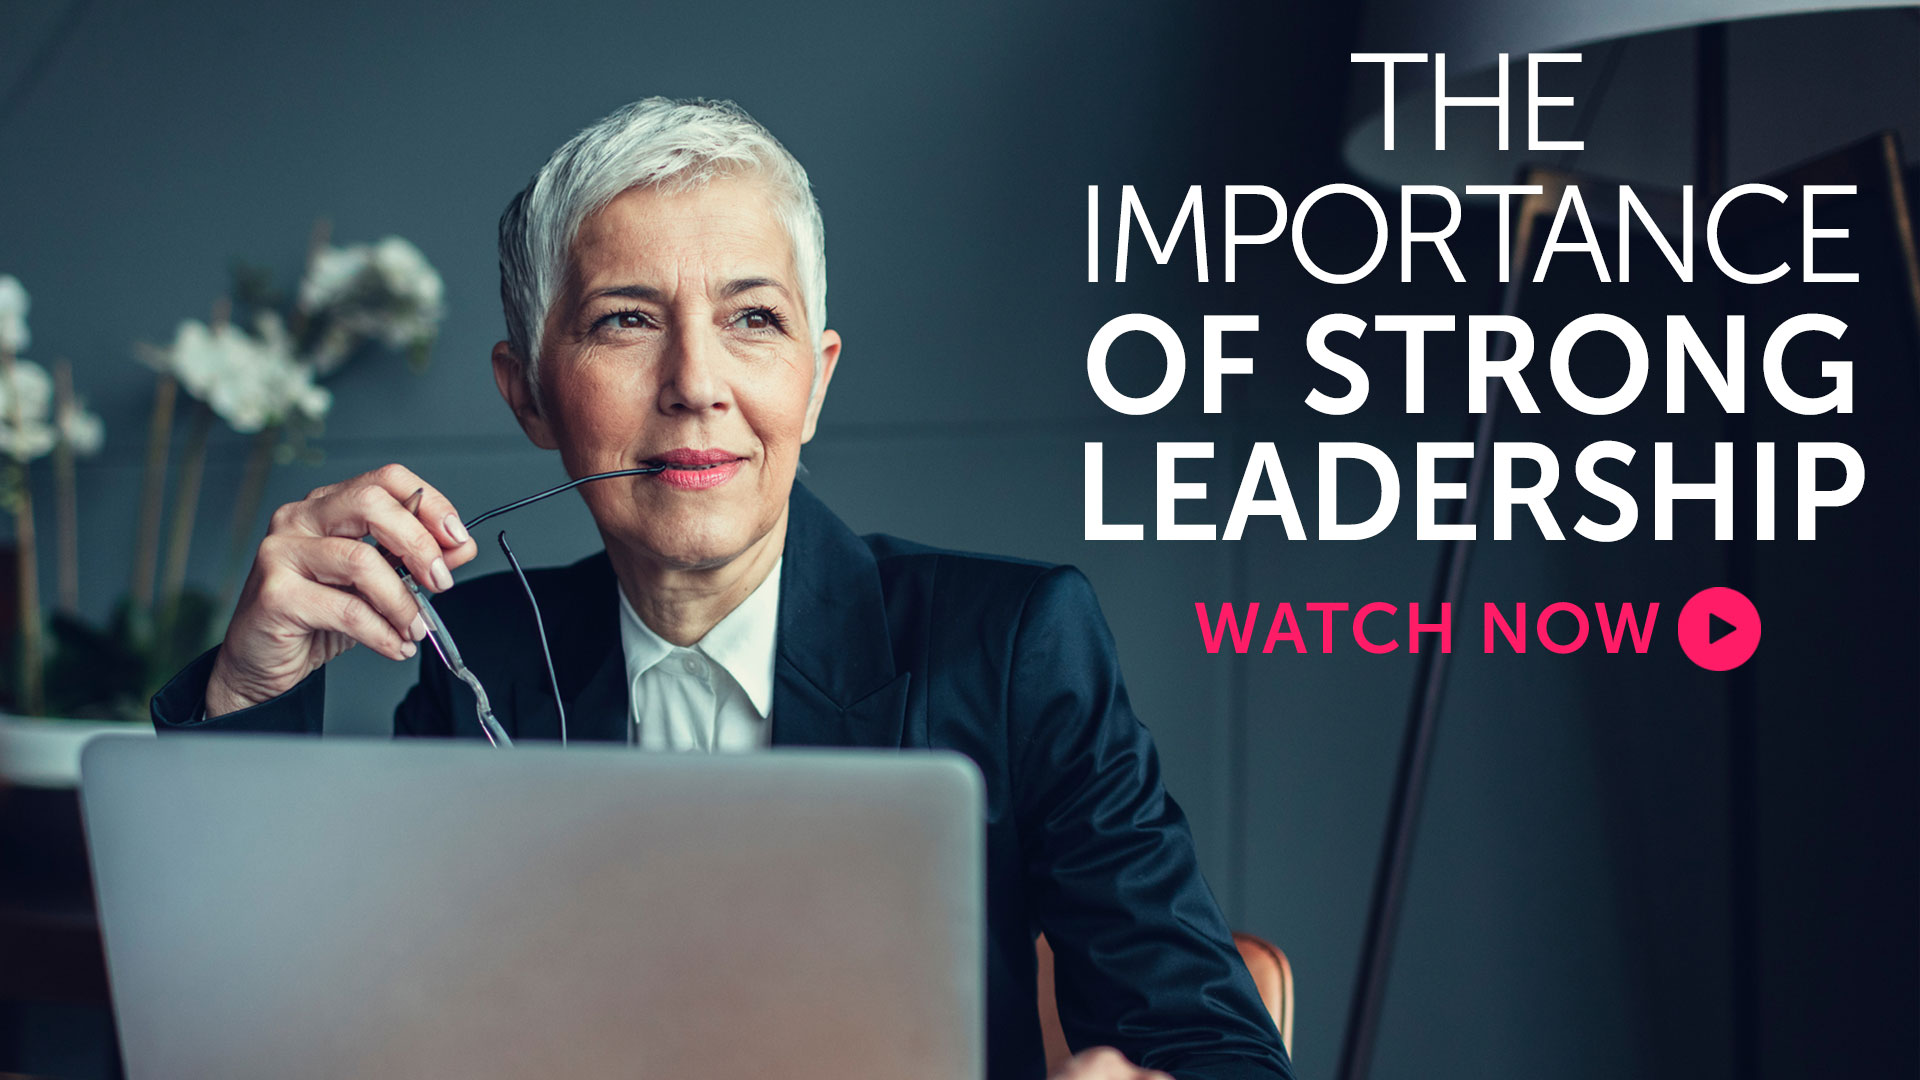 Briefing: The importance of strong leadership